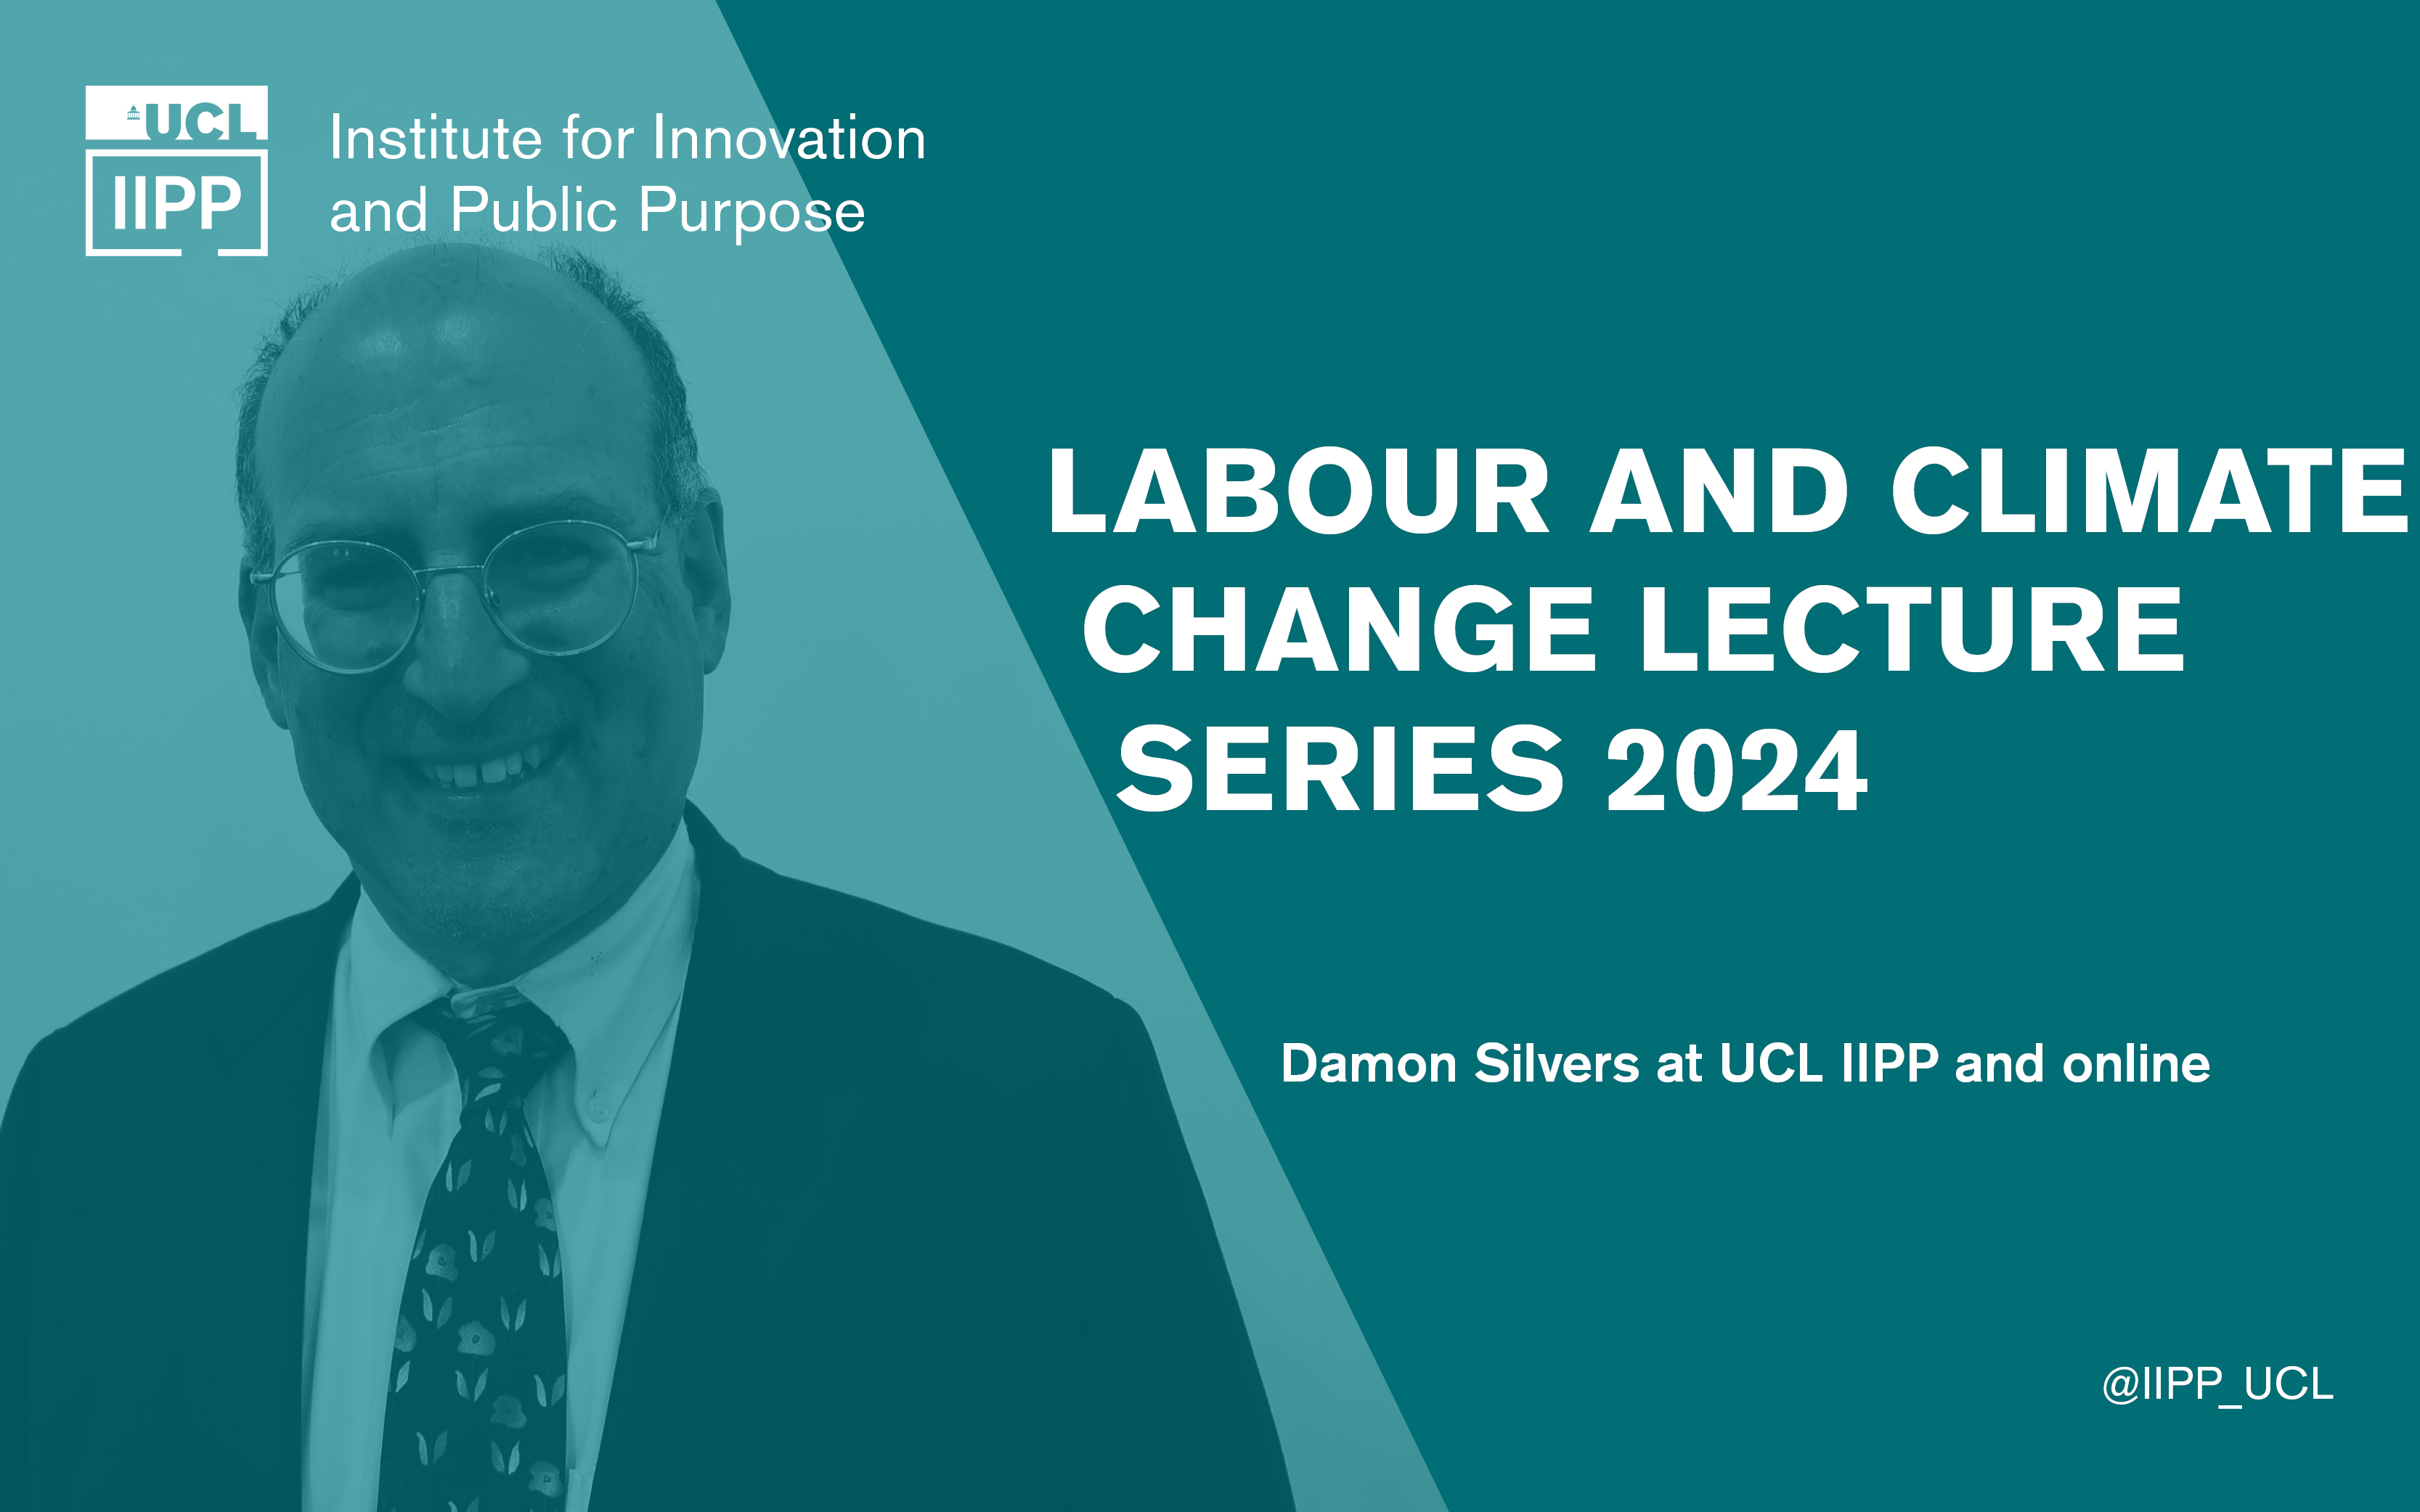 UCL IIPP Labour and Climate Change Lecture Series 2024